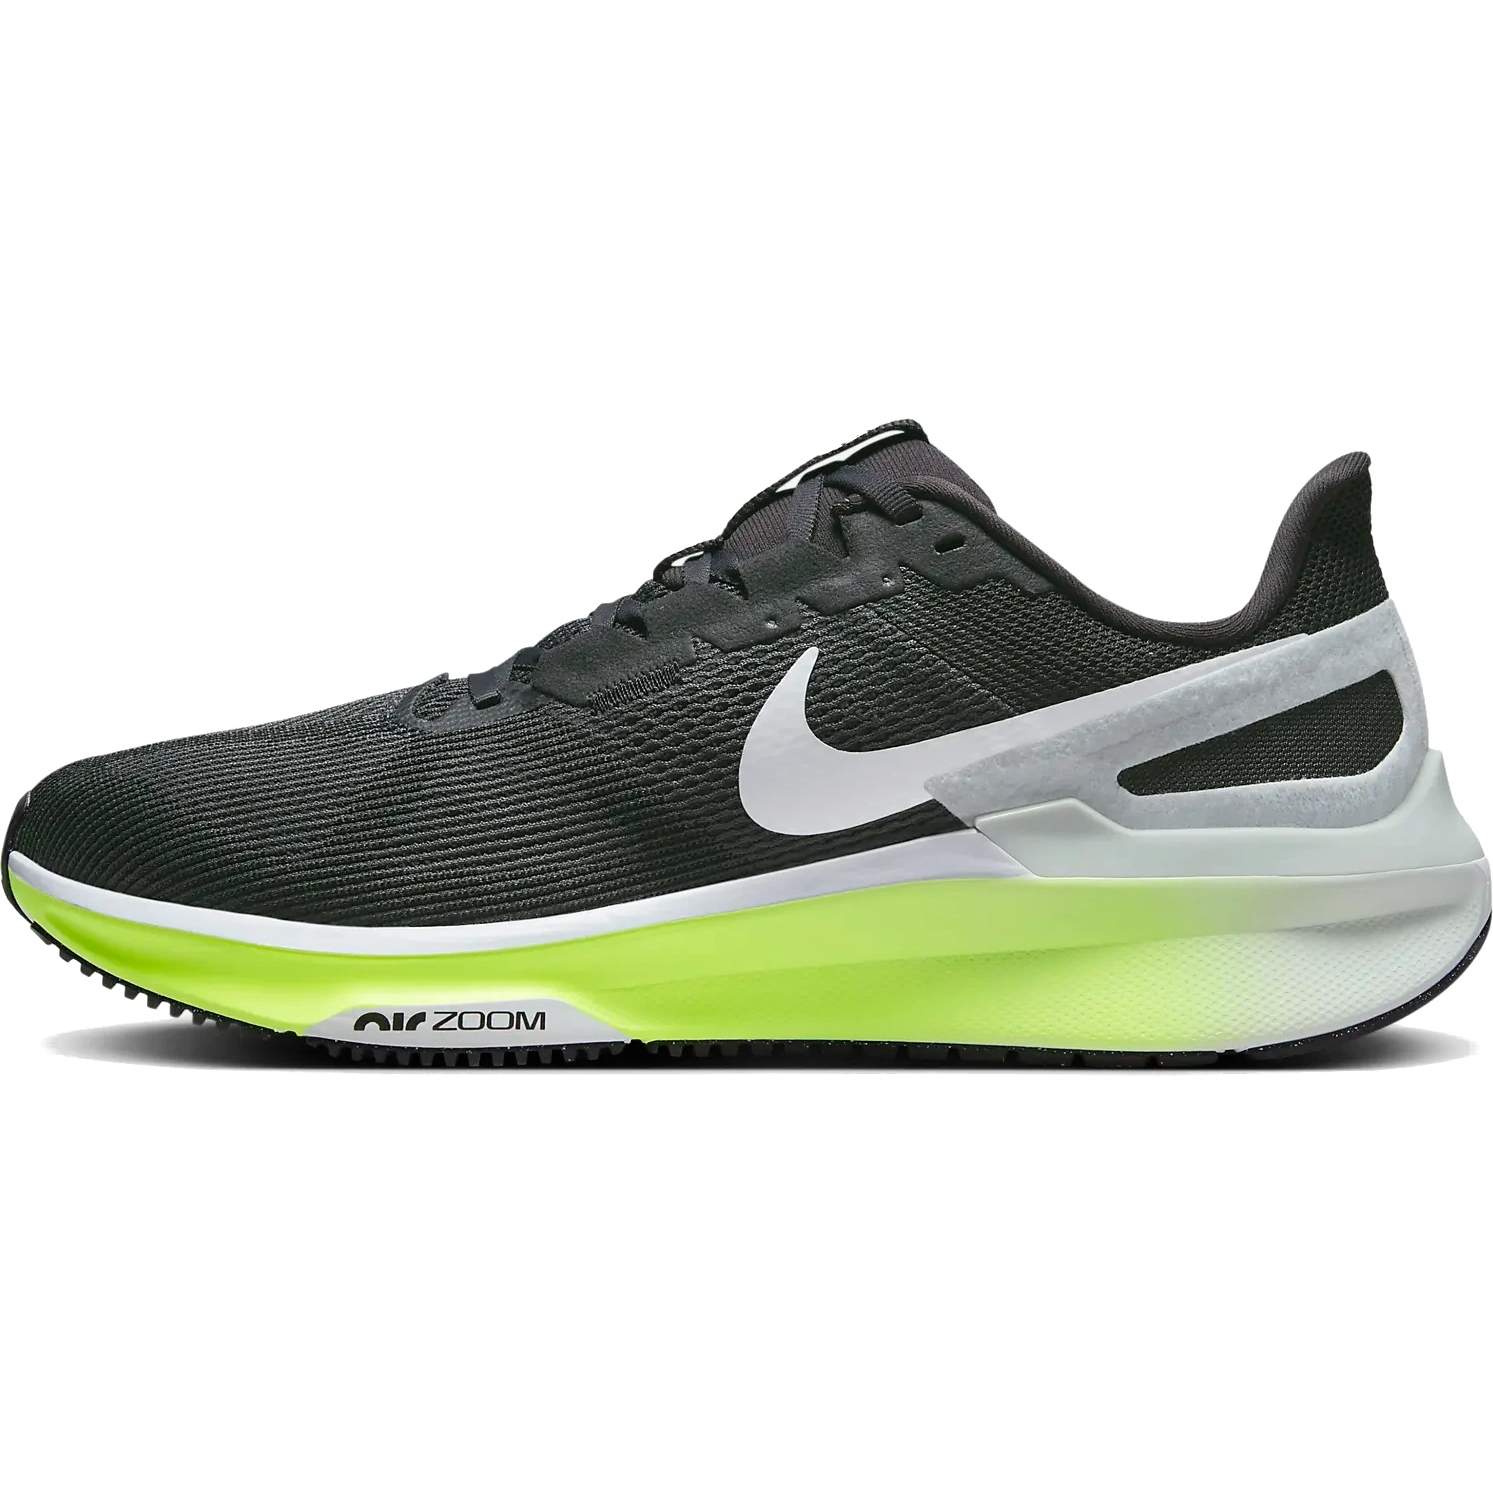 Image of Nike Structure 25 Running Shoes Men - anthracite/volt/pure platinum/white DJ7883-005